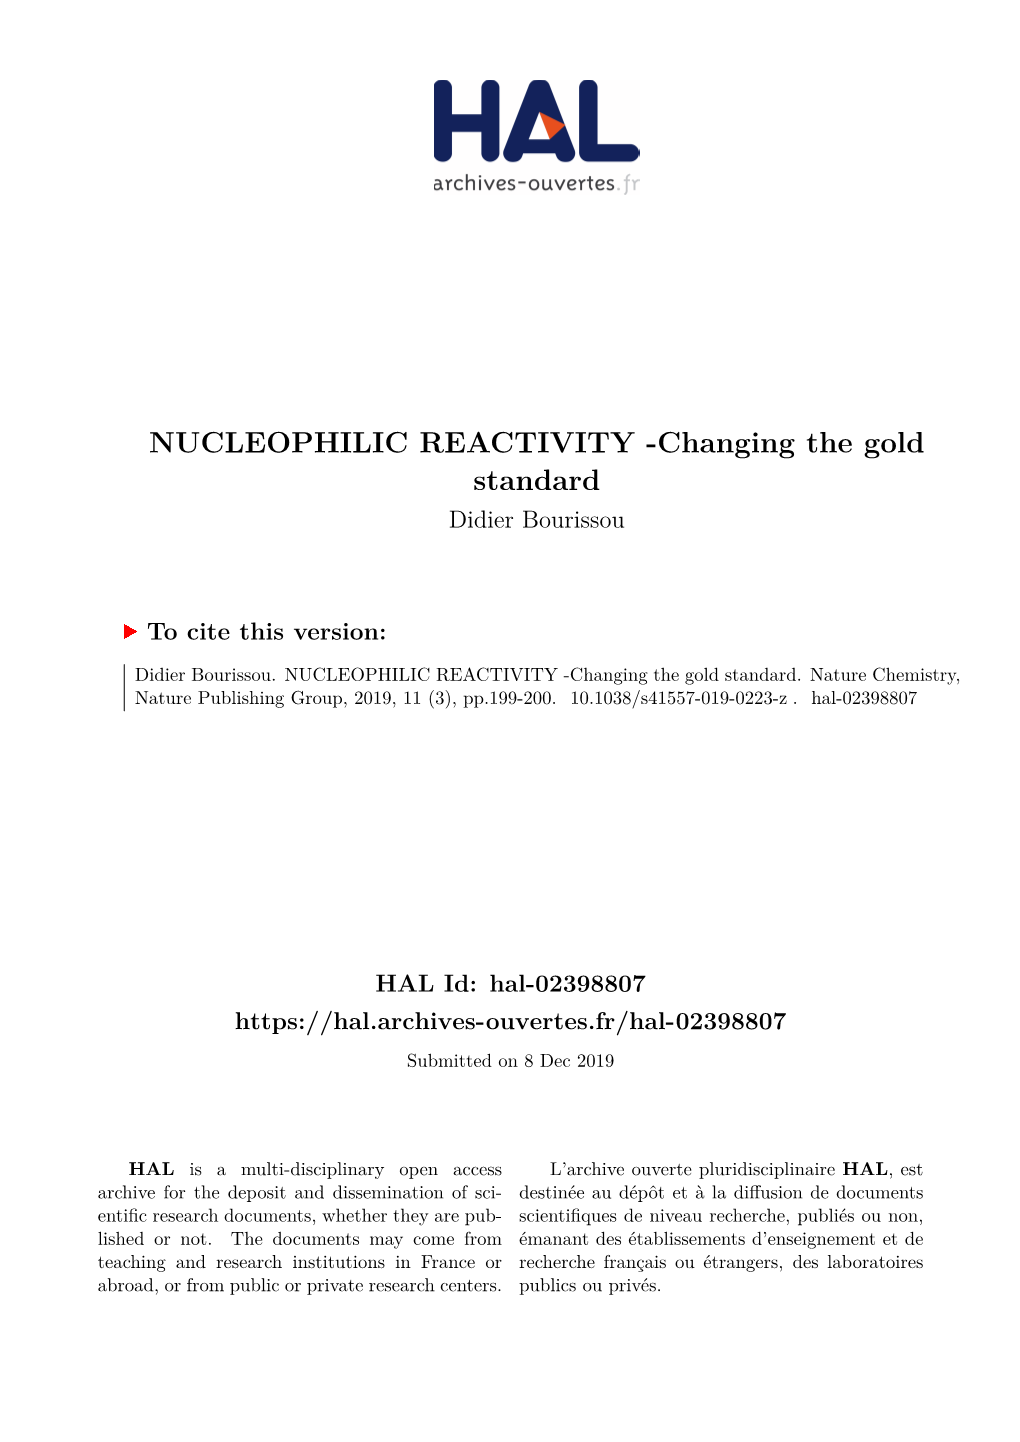 NUCLEOPHILIC REACTIVITY -Changing the Gold Standard Didier Bourissou